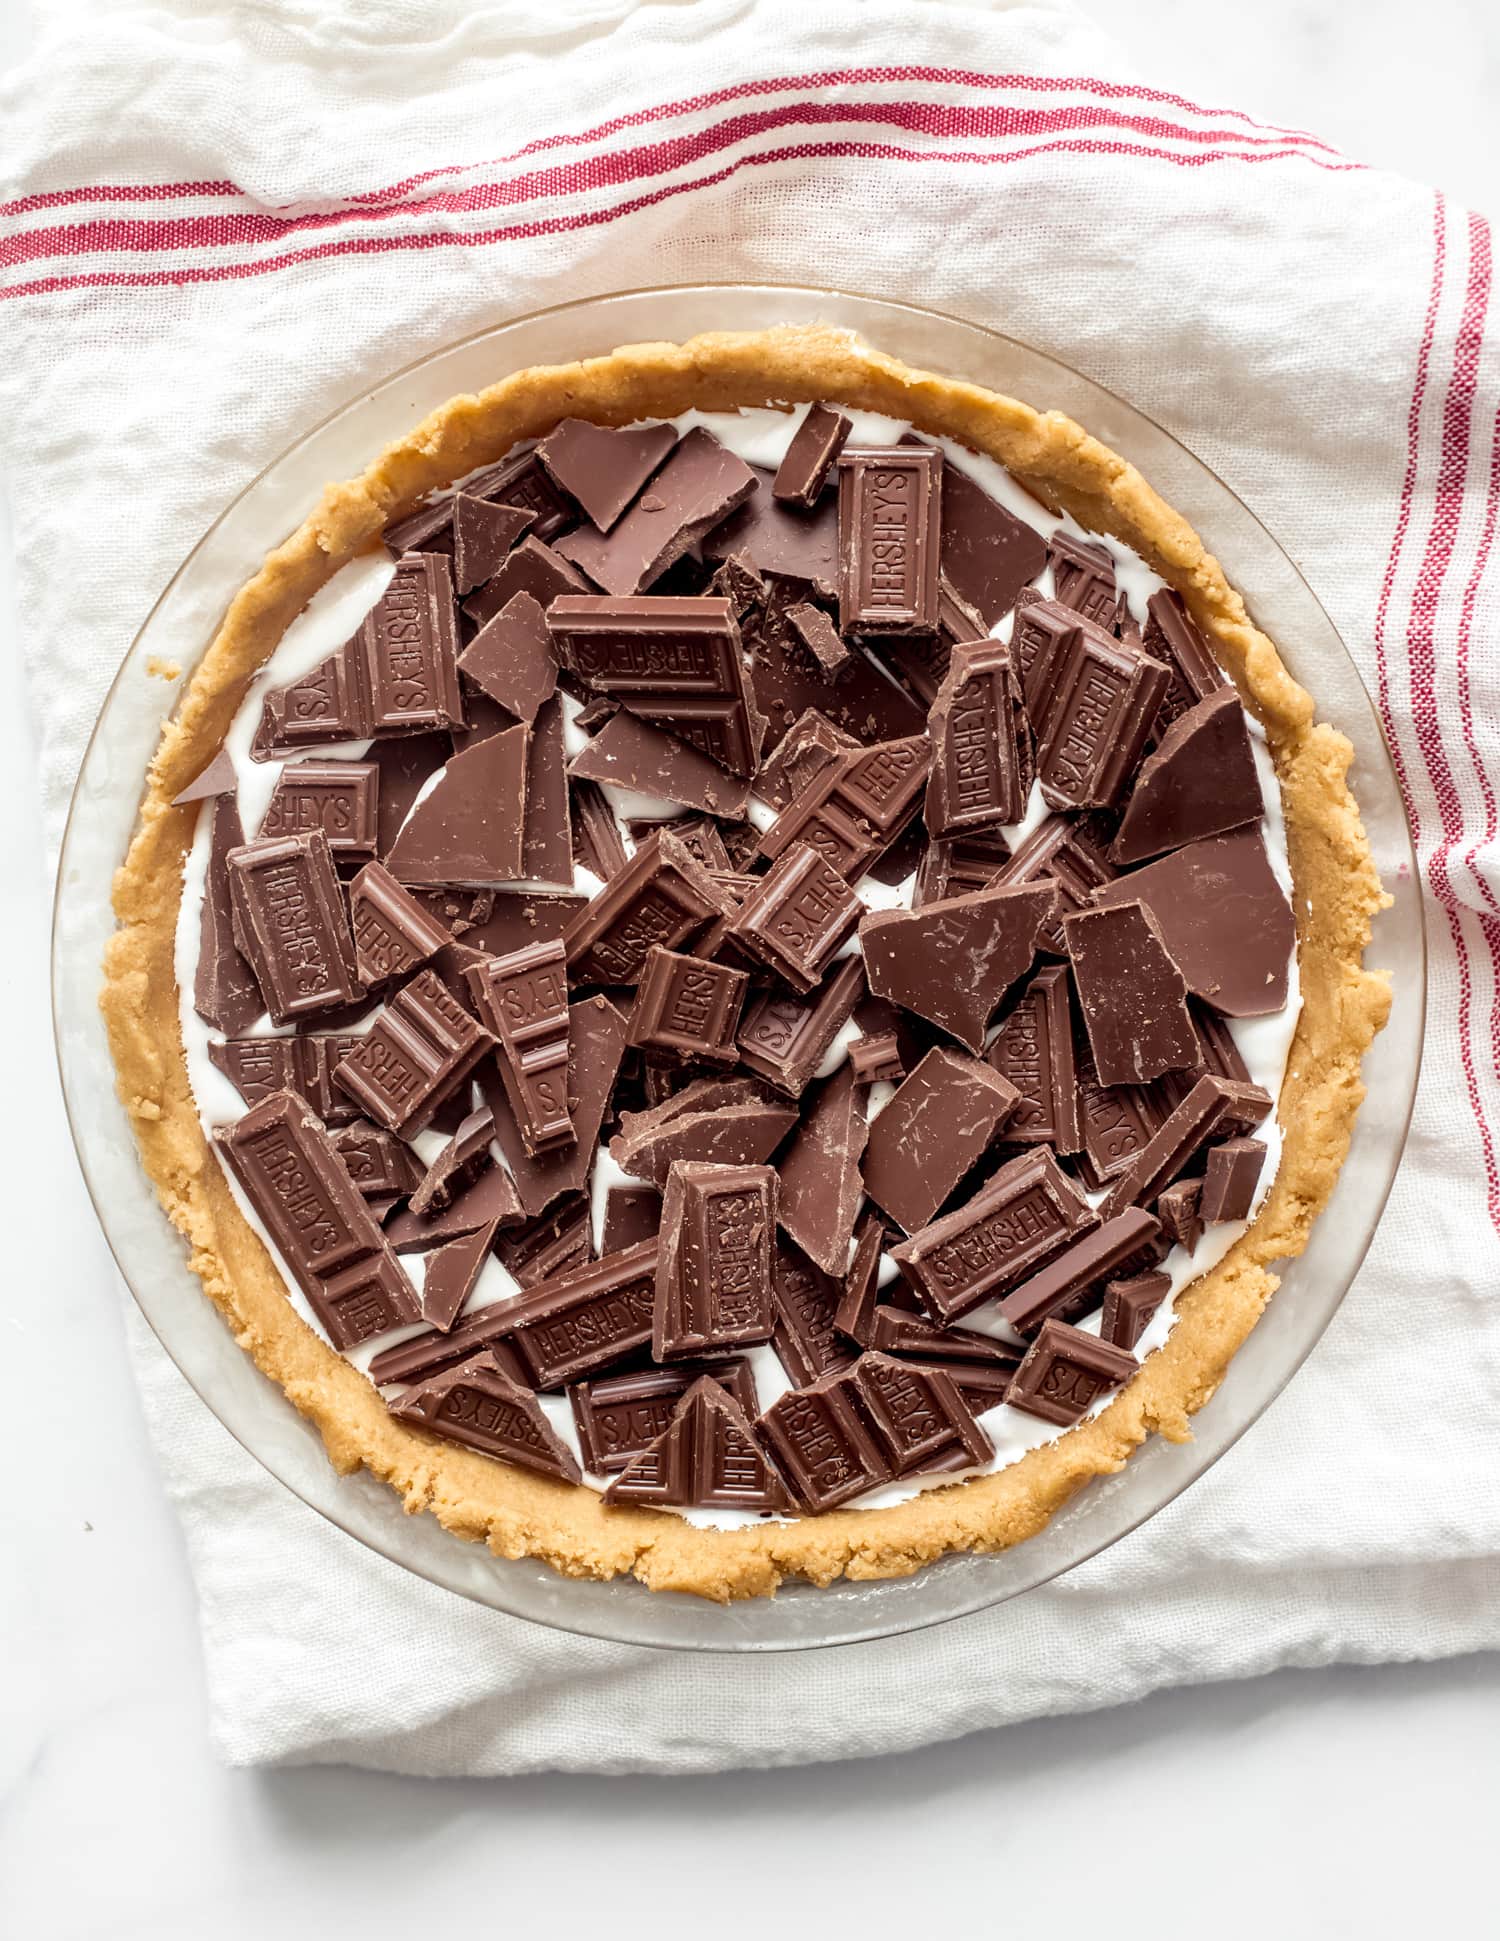 The pie is topped with marshmallow fluff and Hershey's chocolate and baked.